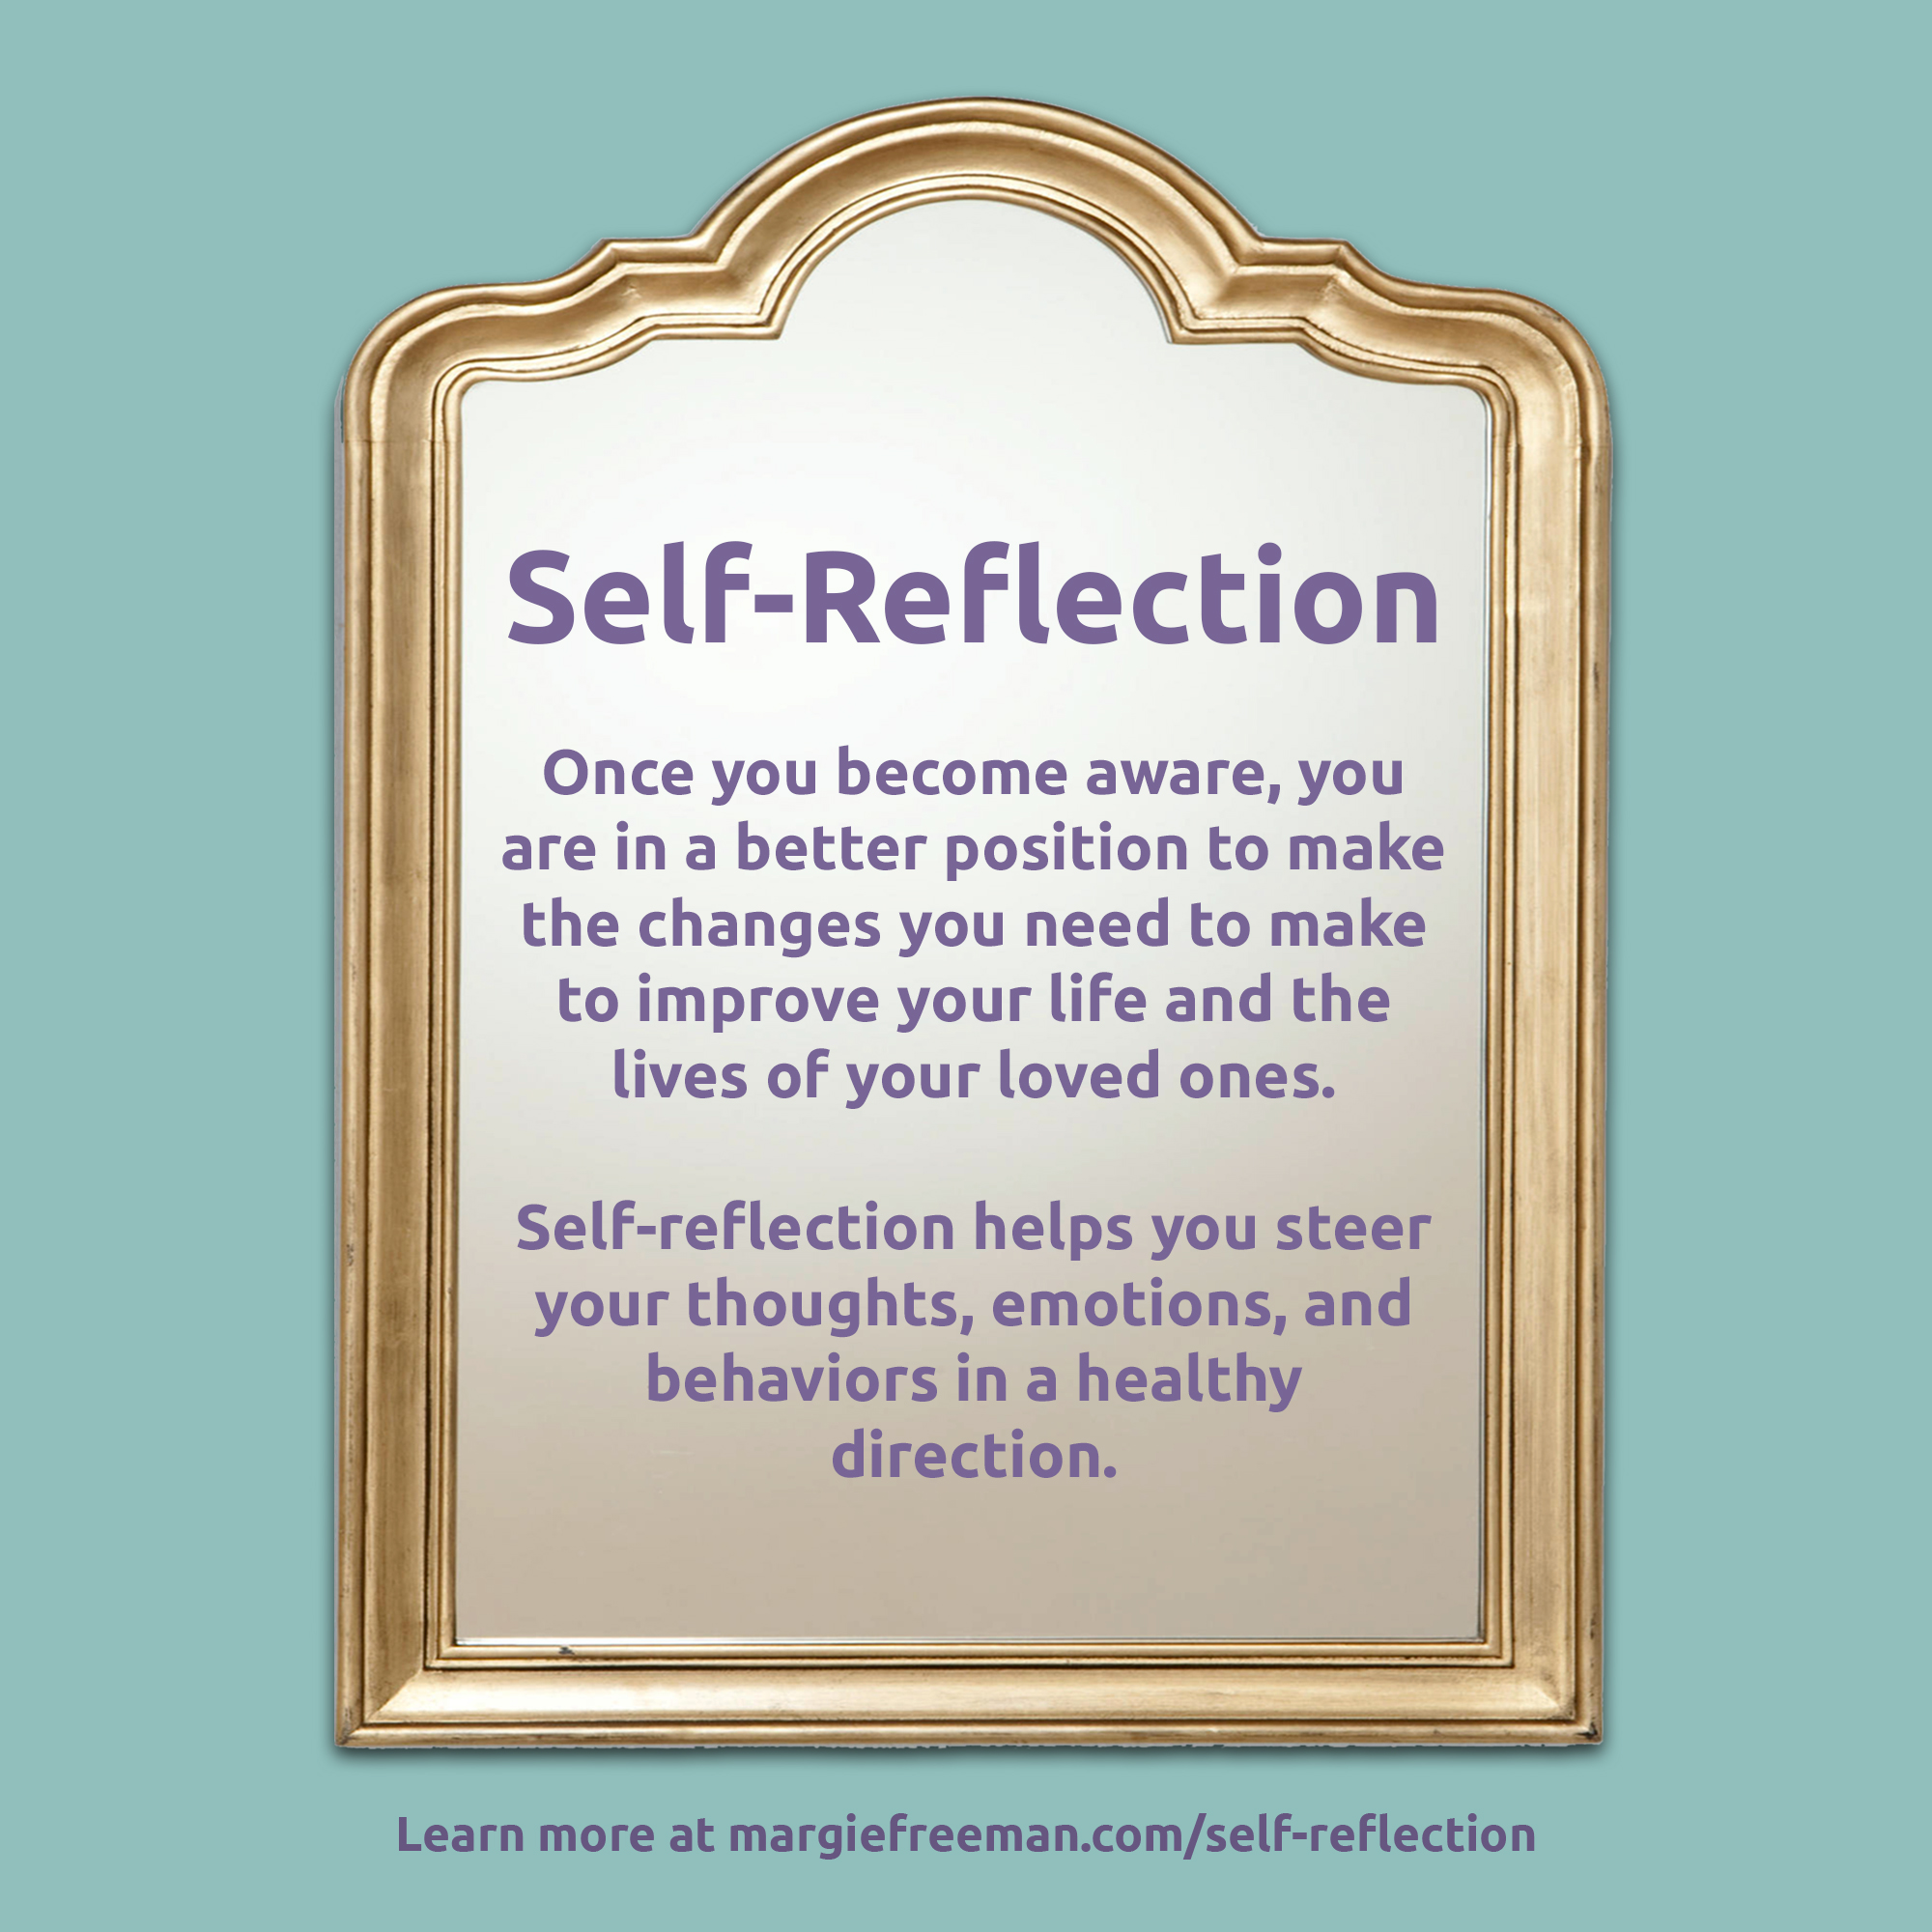 Self-reflection - Counseling Care Specialties - Margie Freeman LCSW